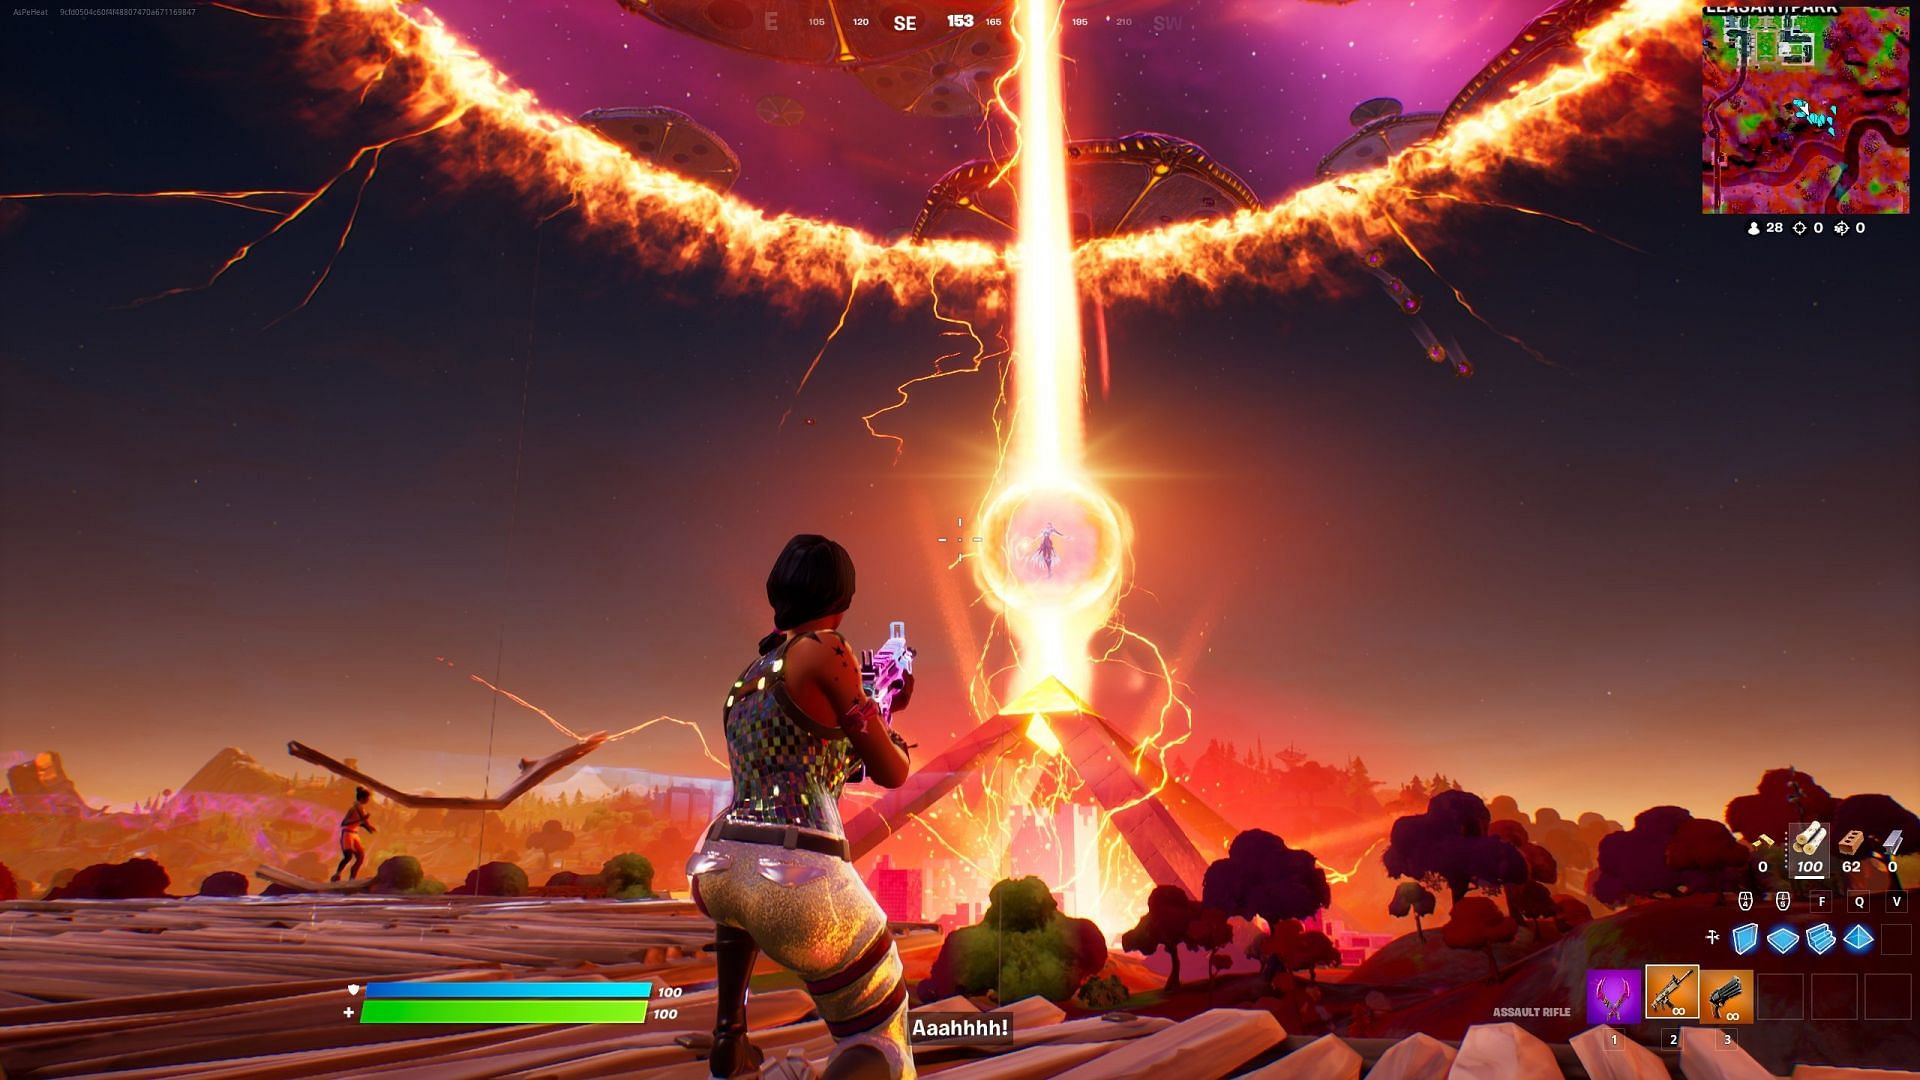 The Cube Queen opened similar portals during The End event (Image via Epic Games)